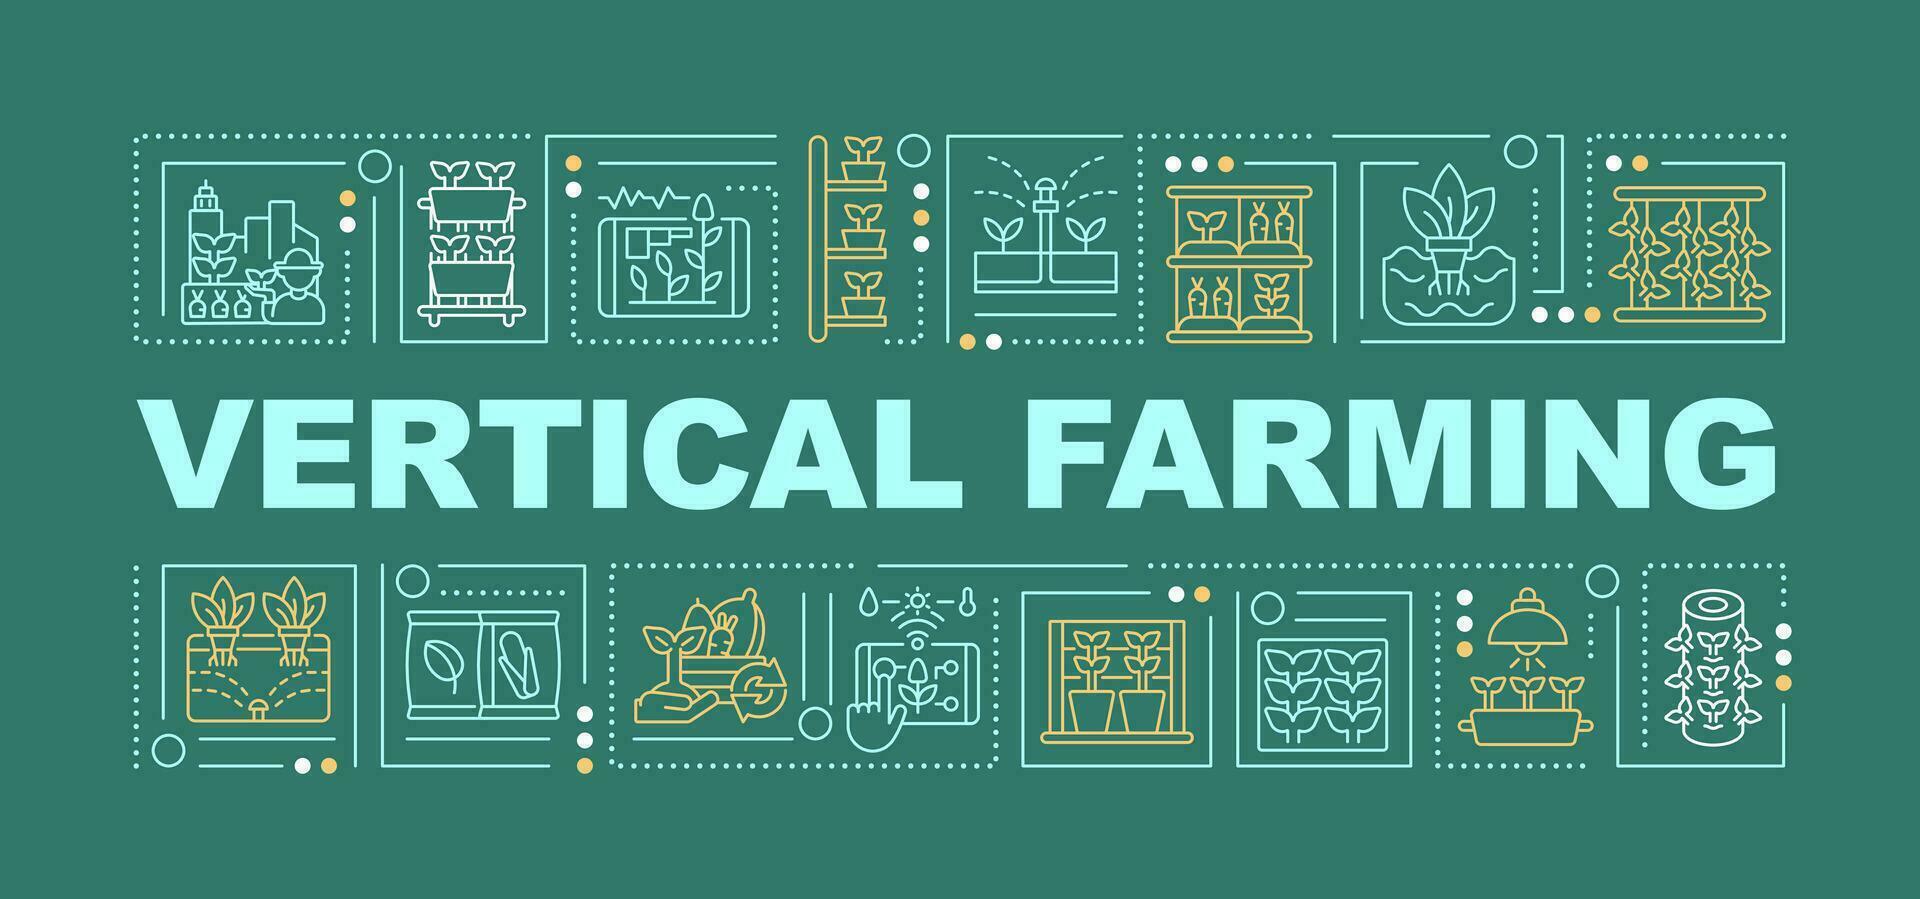 Vertical farming text with various icons on dark green monochromatic background, 2D vector illustration.